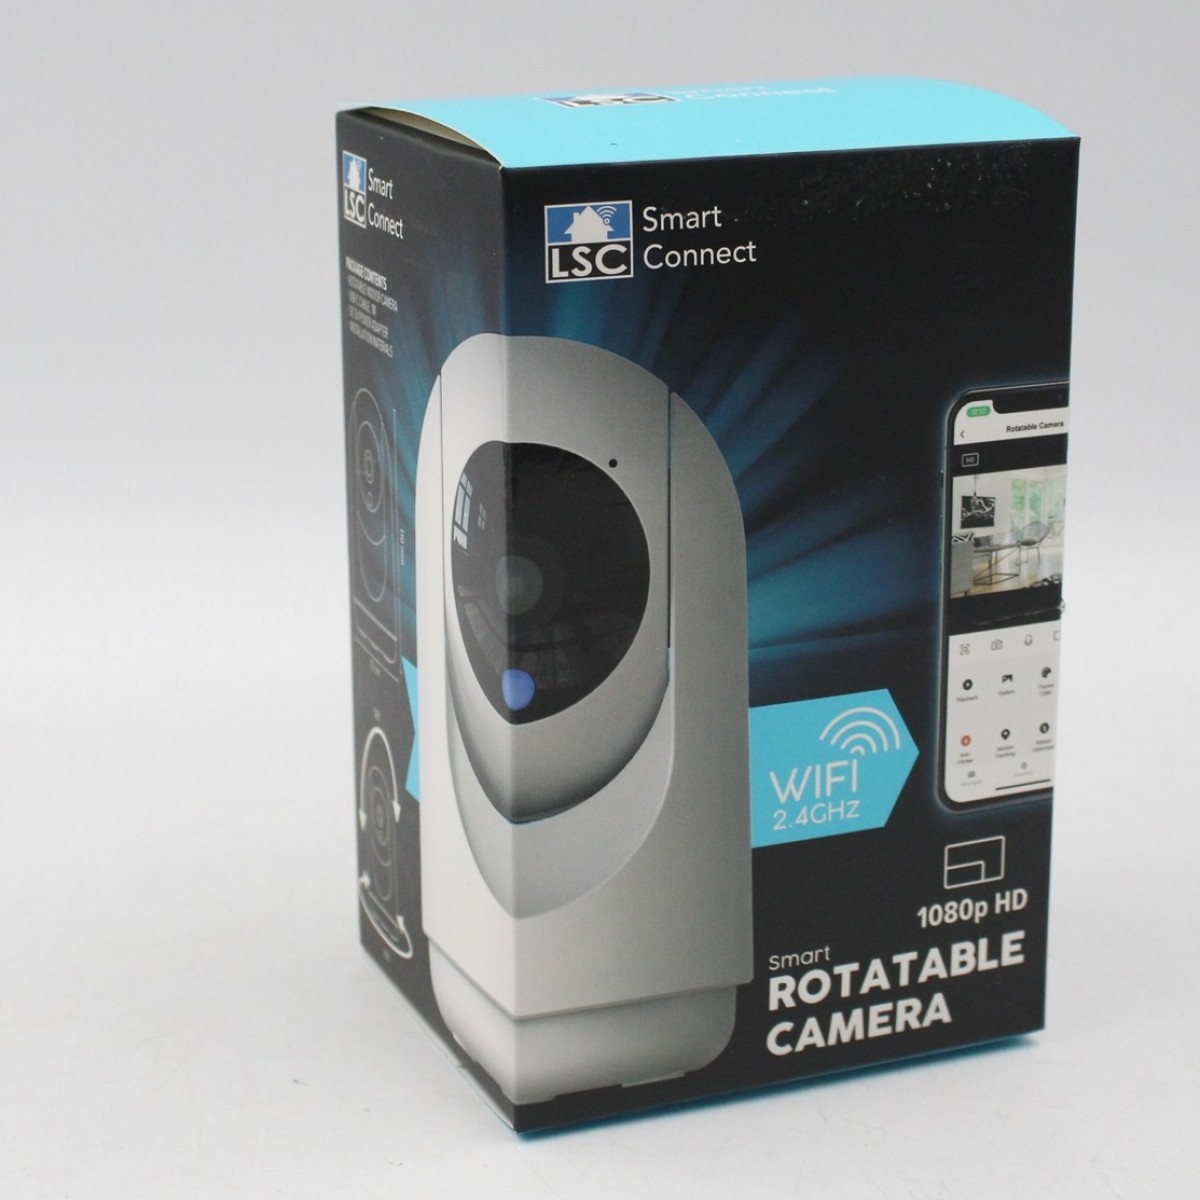 LSC Smart Connect rotatable camera